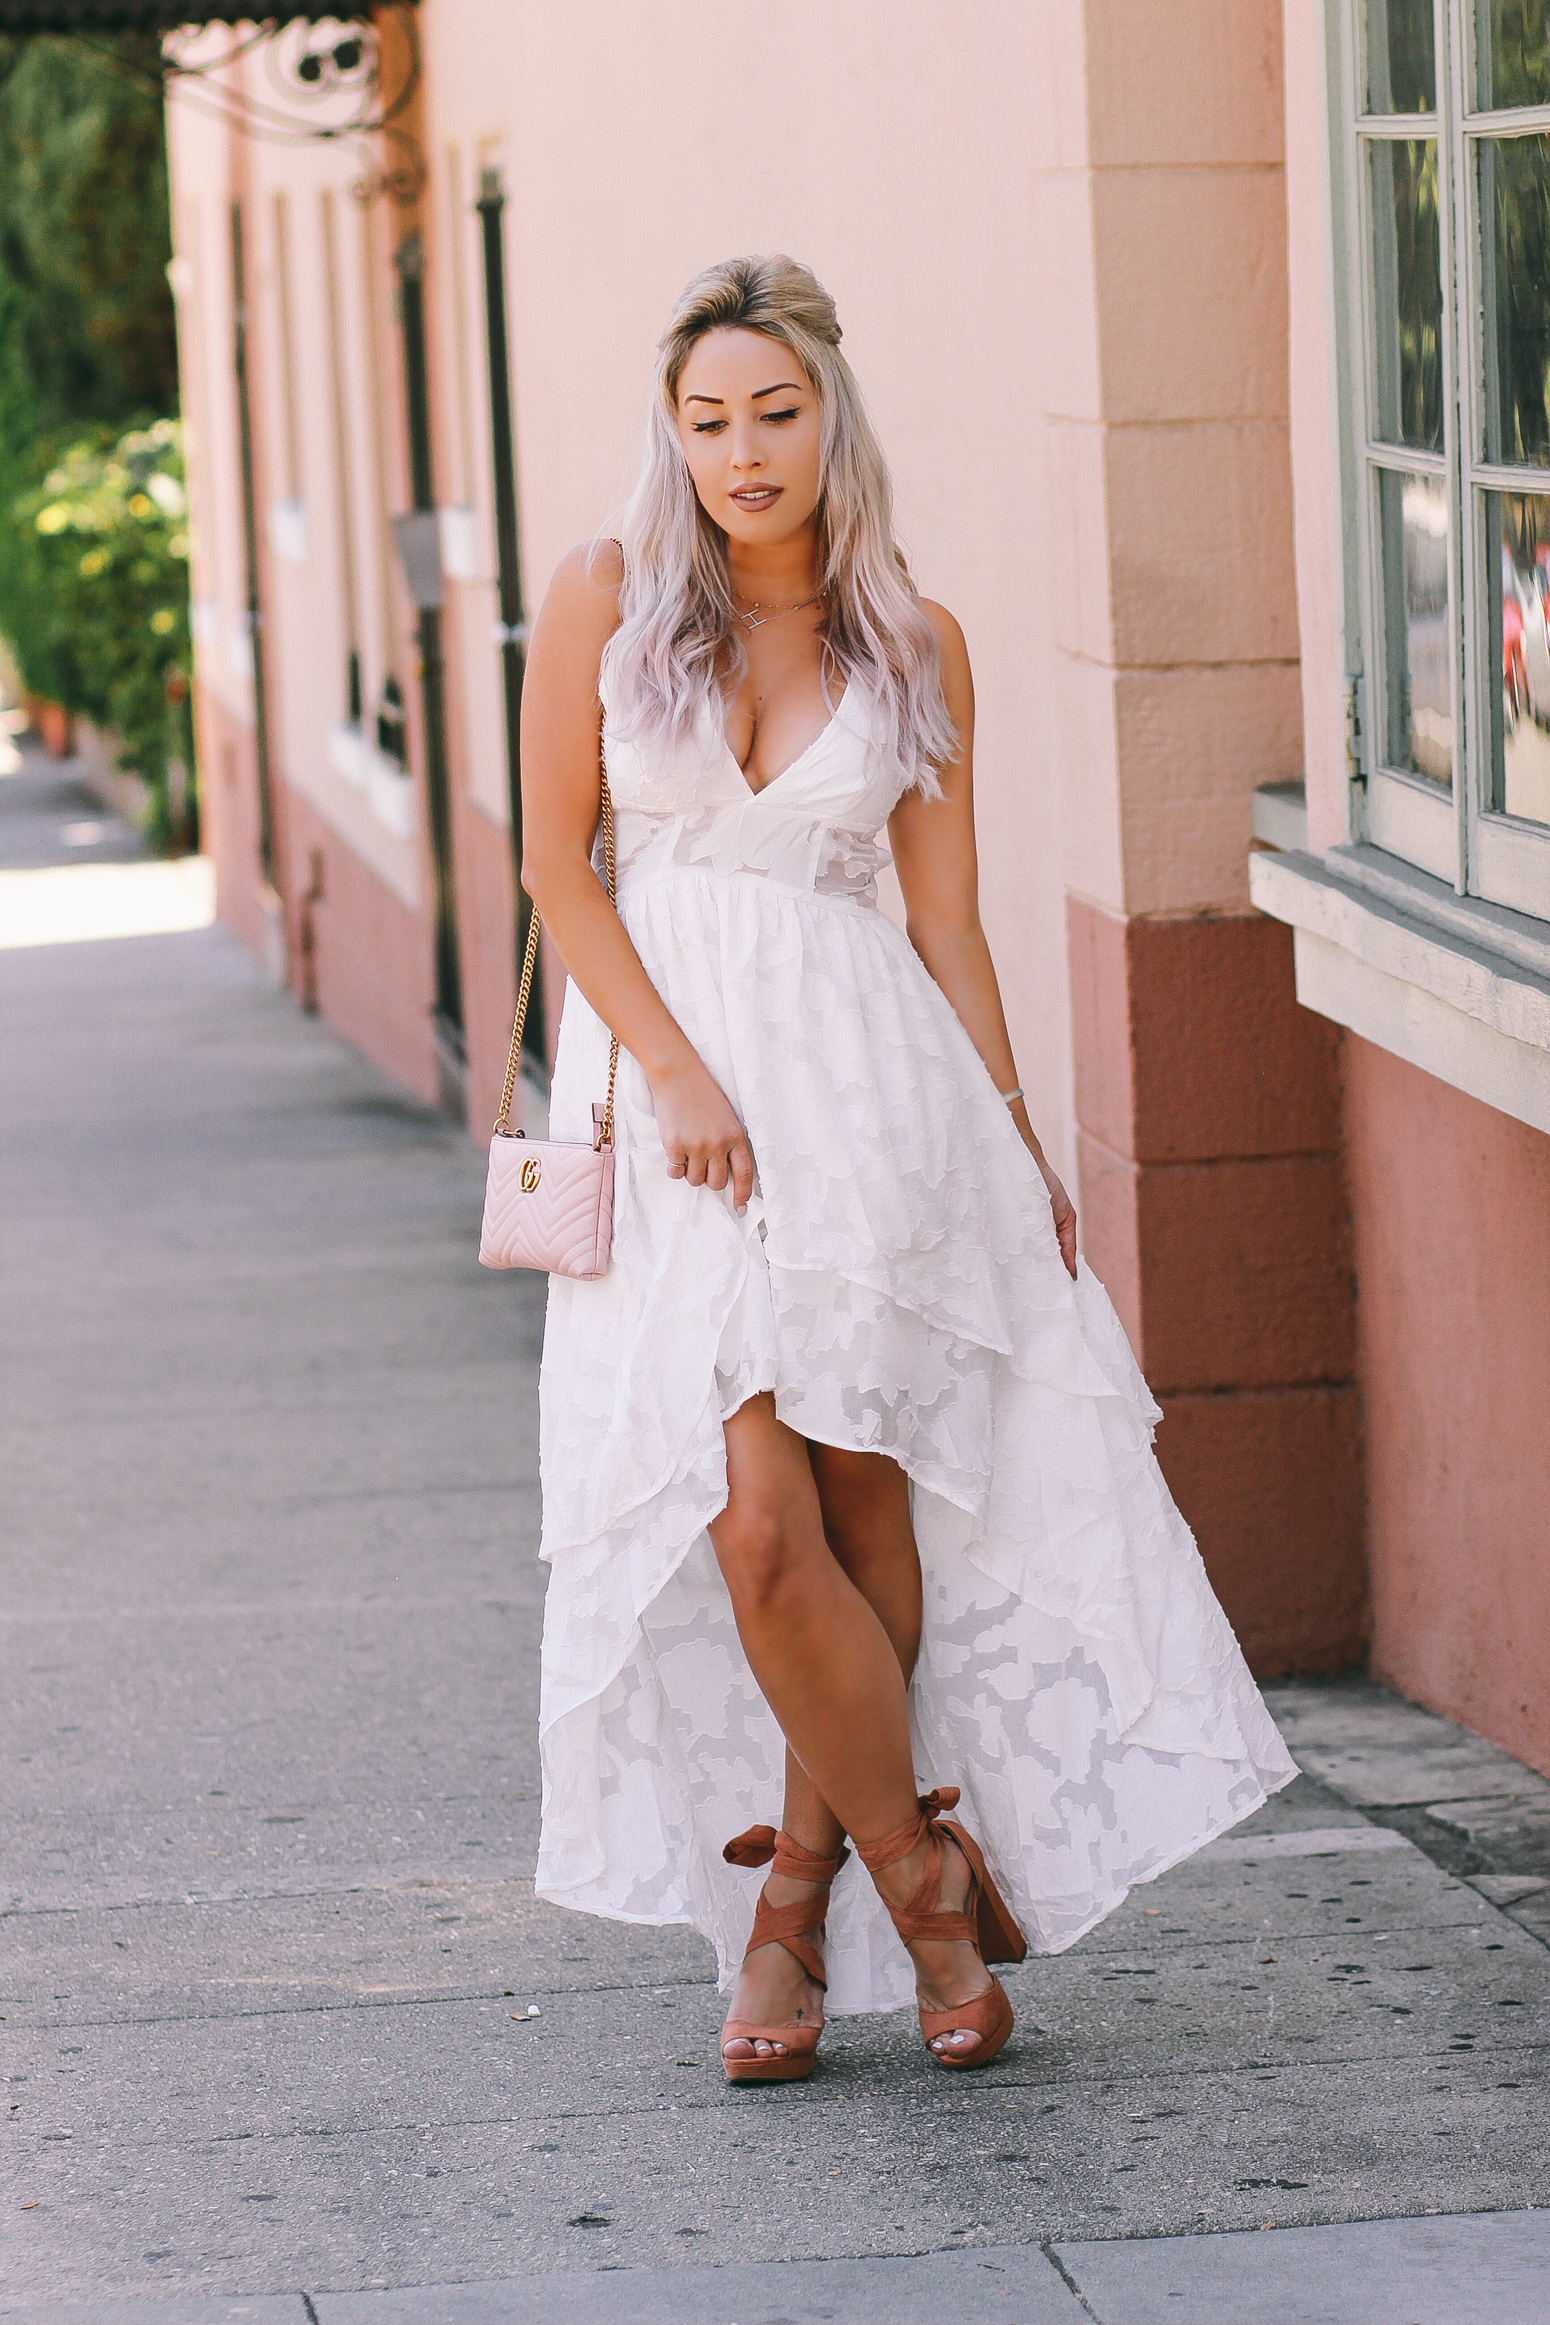 Don't Know What To Wear To Your Bridal Shower? Here Are 5 Dresses I've Worn That Would Be Perfect